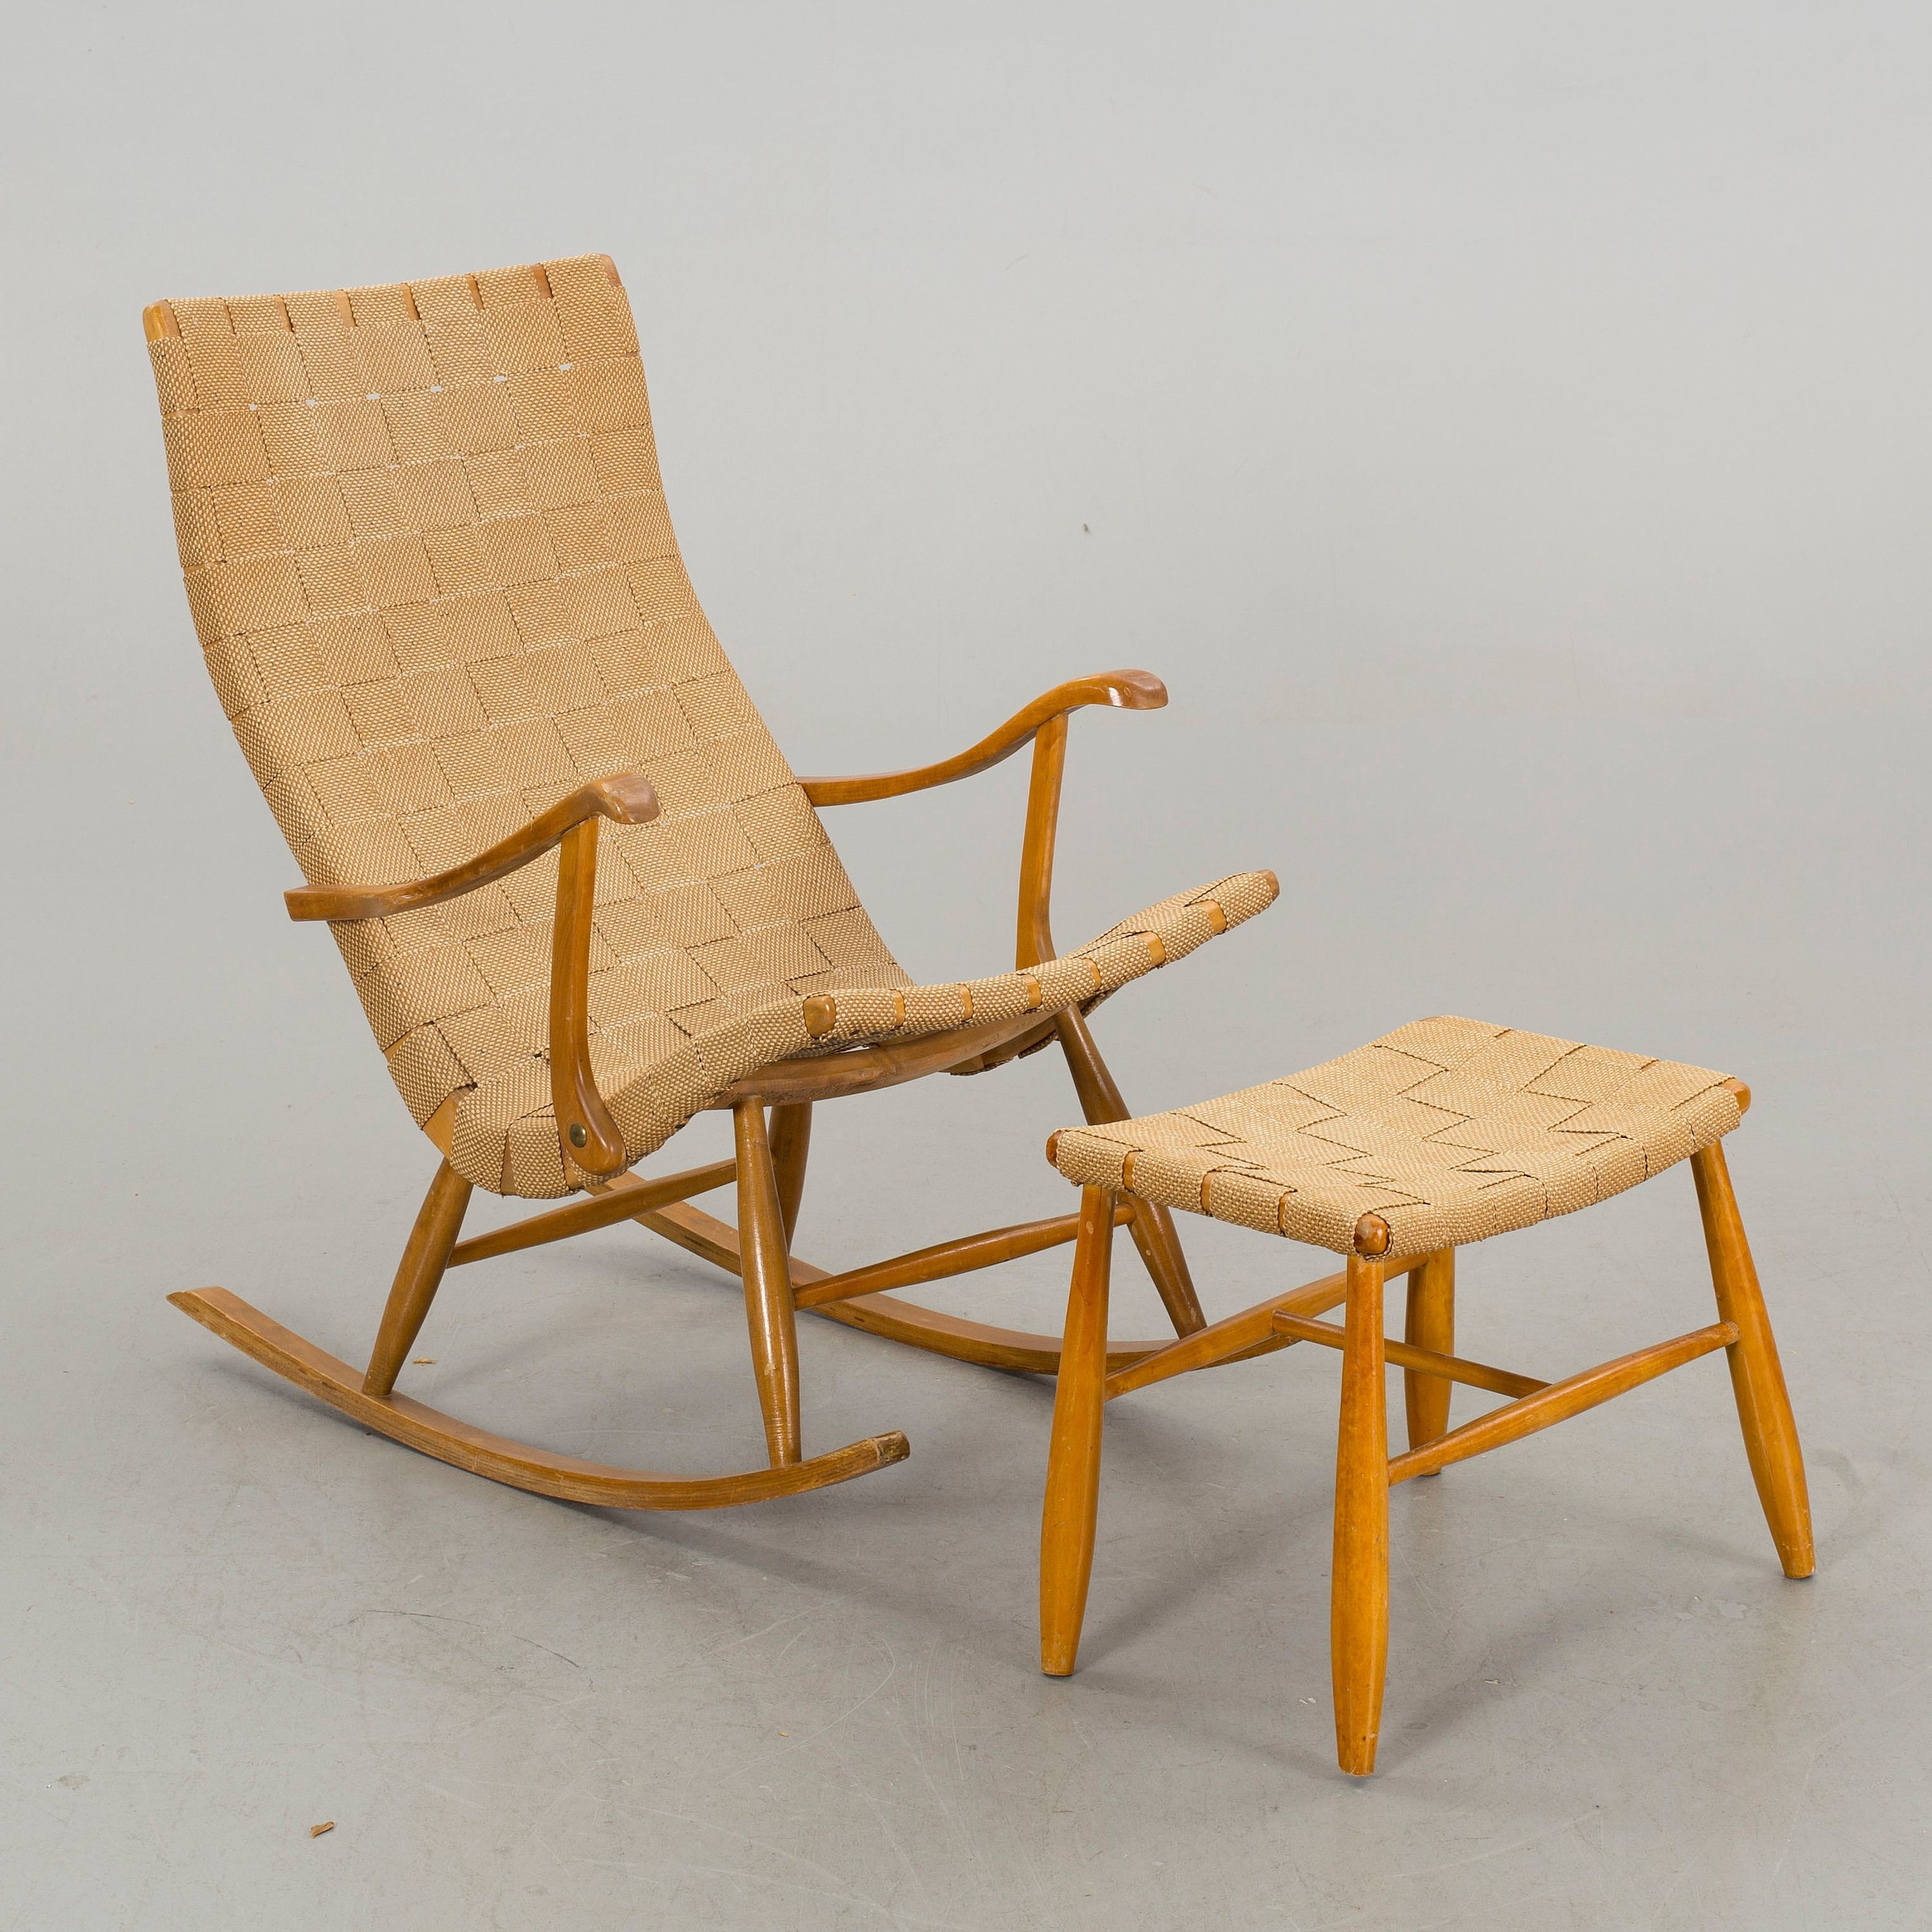 A Rocking Chair With Footstool, 1940/50s, – Bukowskis Within Newest Rocking Chairs With Footstool (View 12 of 15)